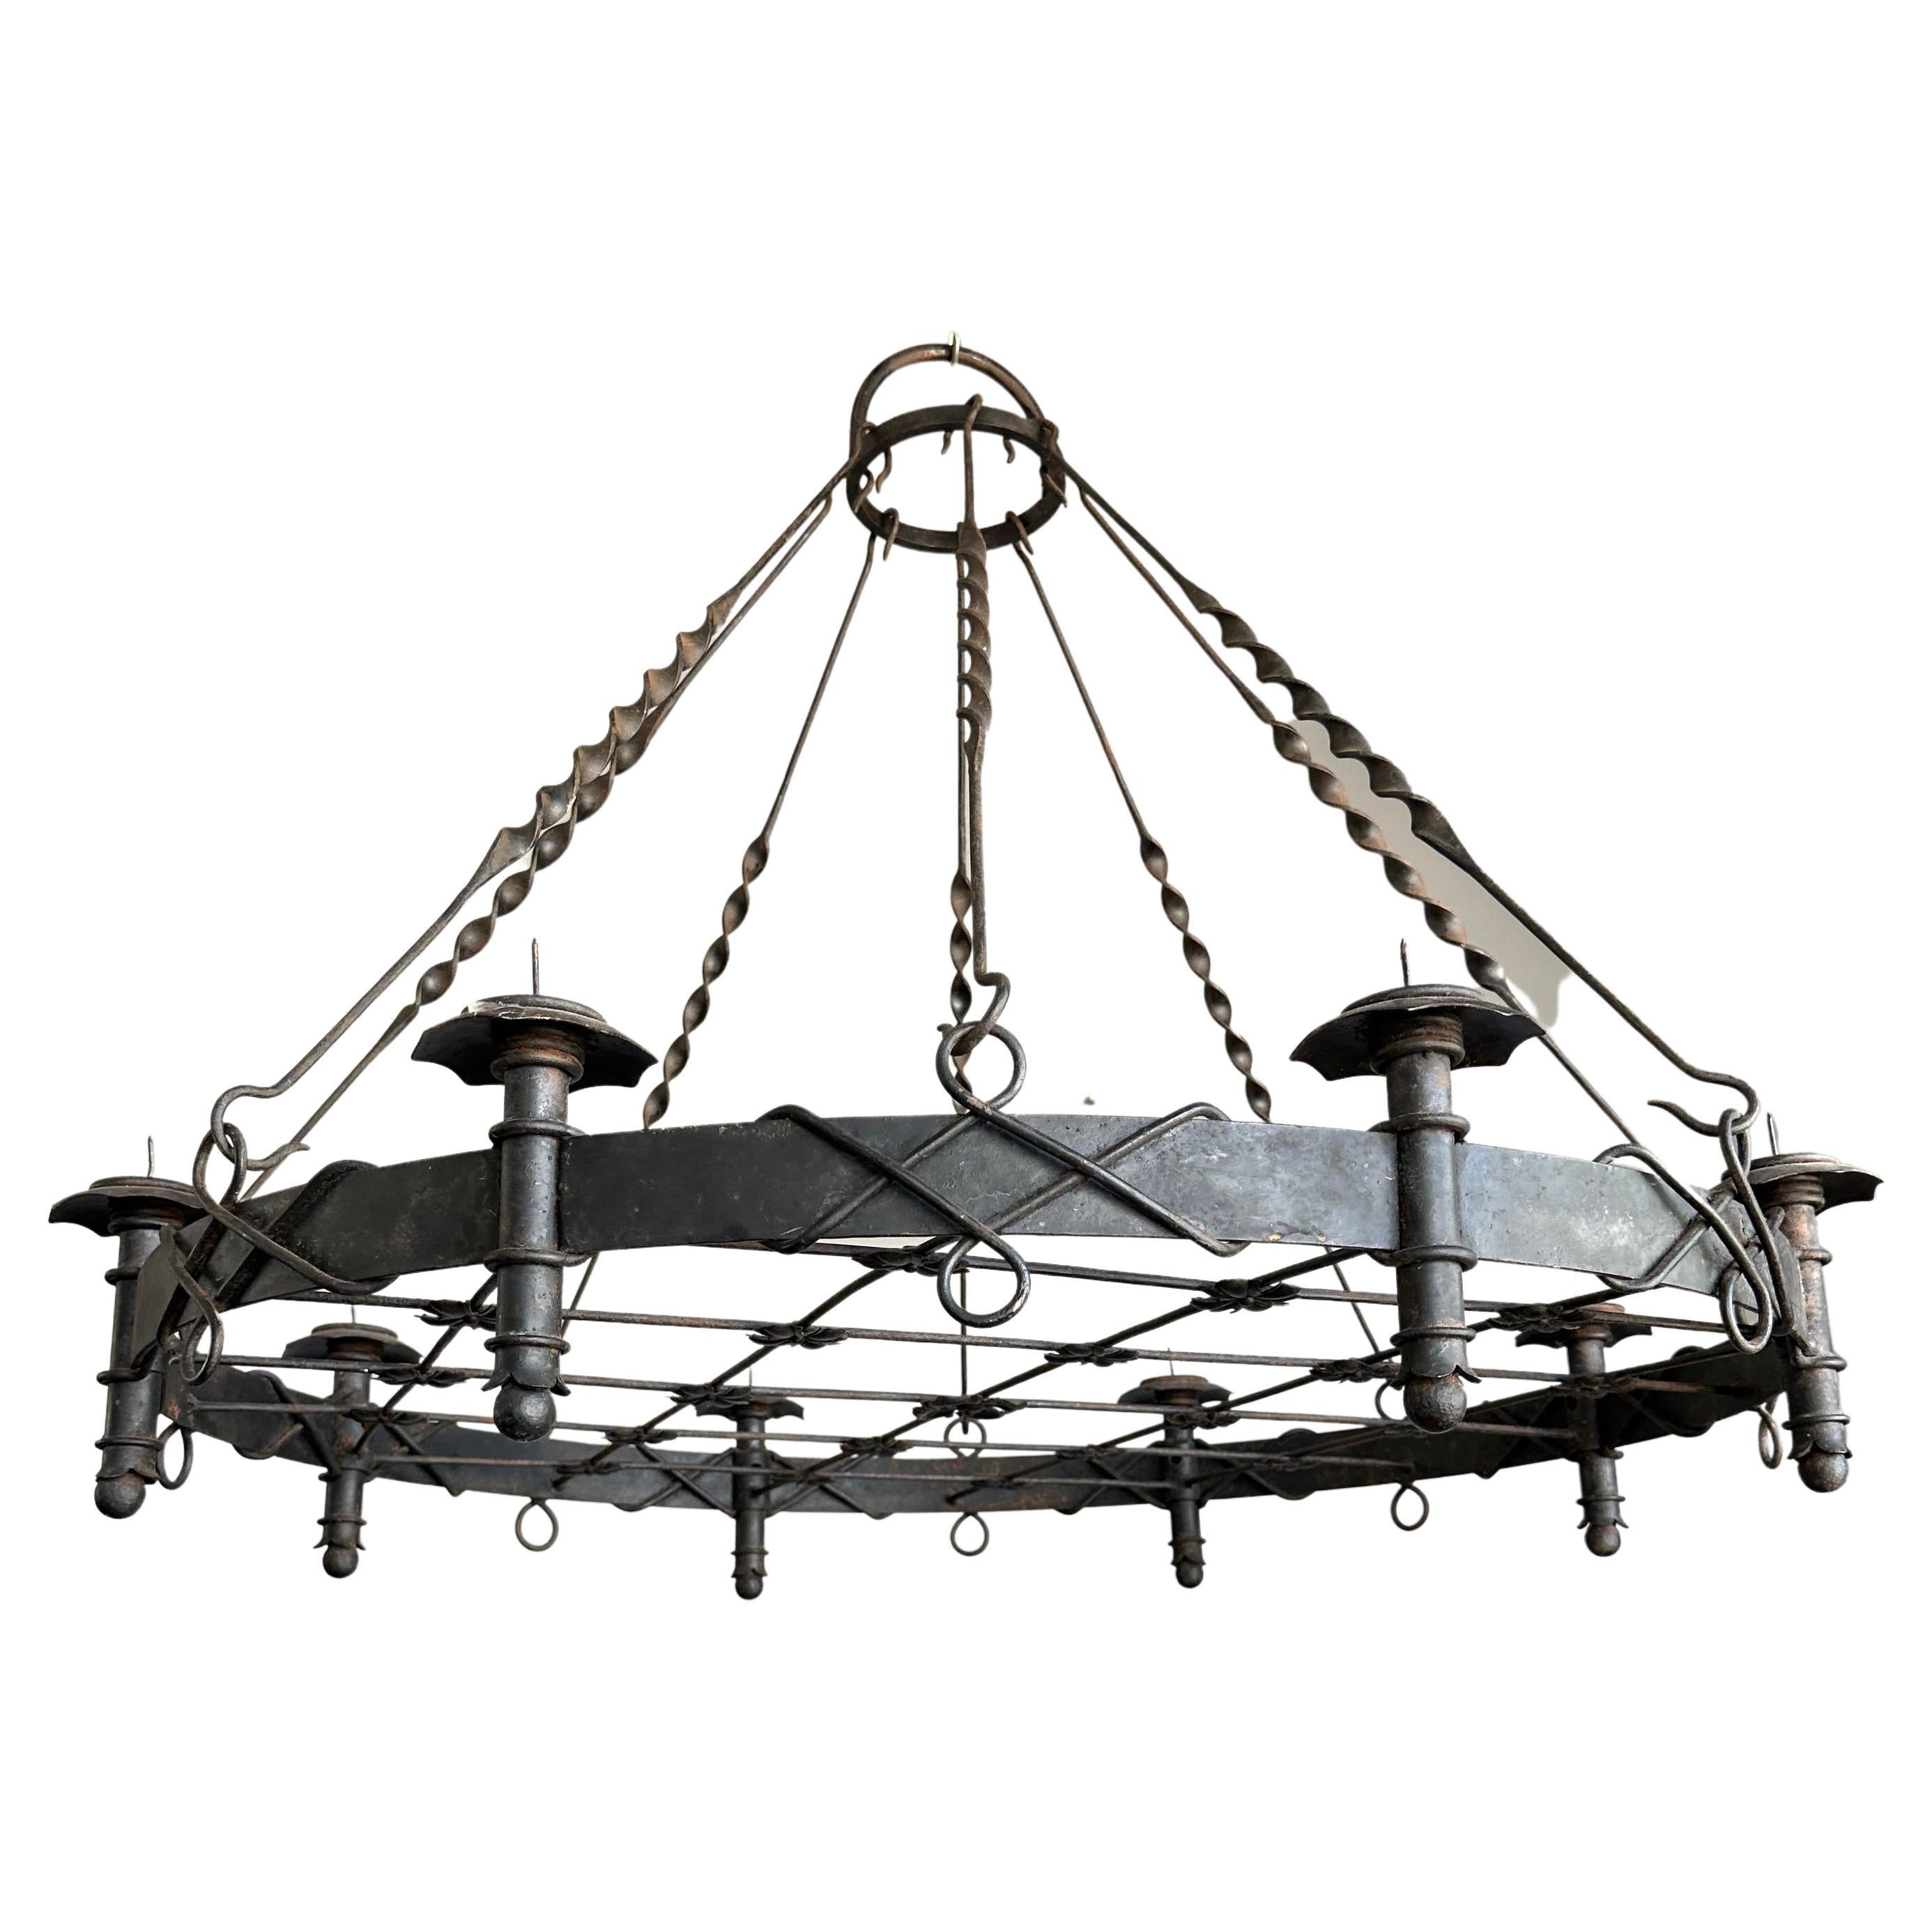 Large Arts & Crafts Wrought Iron Chandelier for Dining Room or Restaurant Etc For Sale